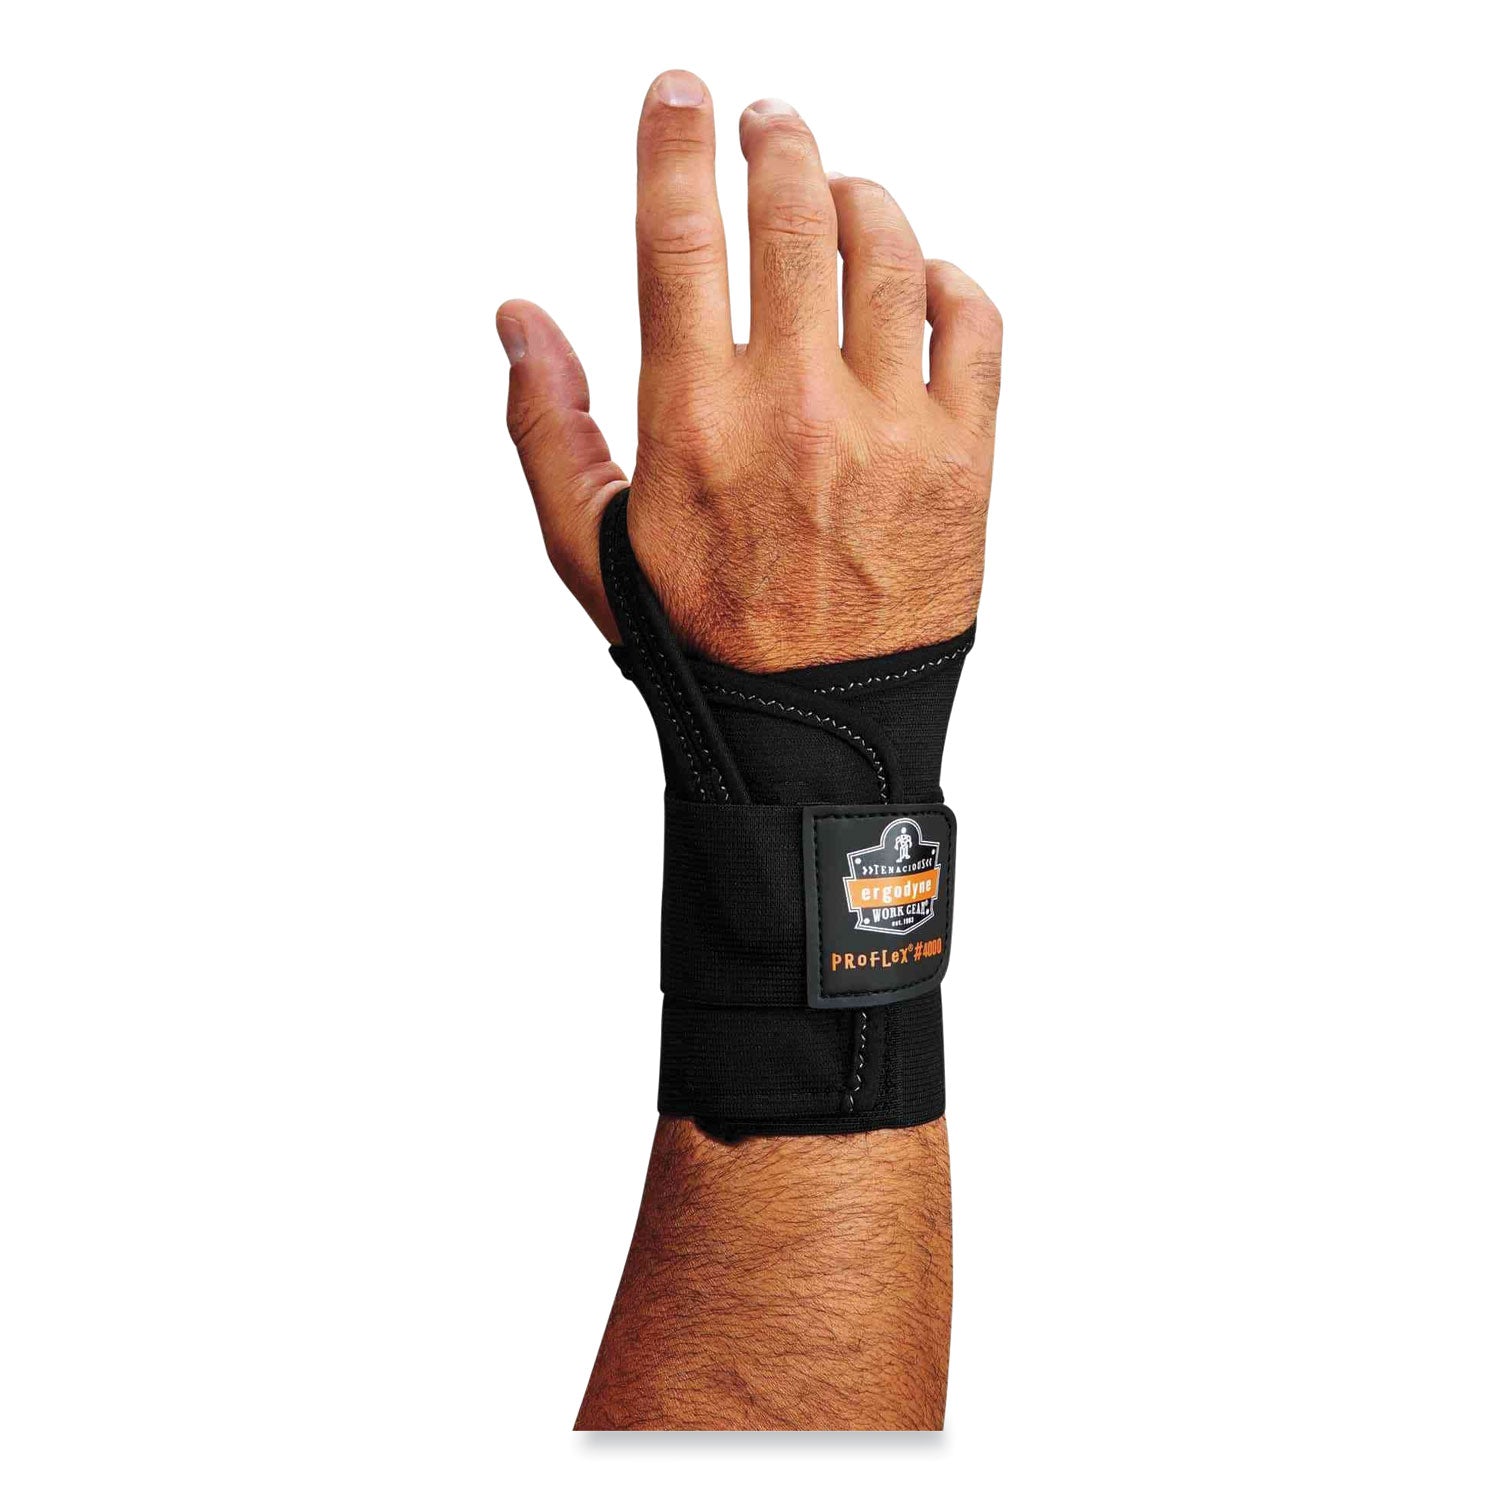 proflex-4000-single-strap-wrist-support-small-fits-right-hand-black-ships-in-1-3-business-days_ego70002 - 1